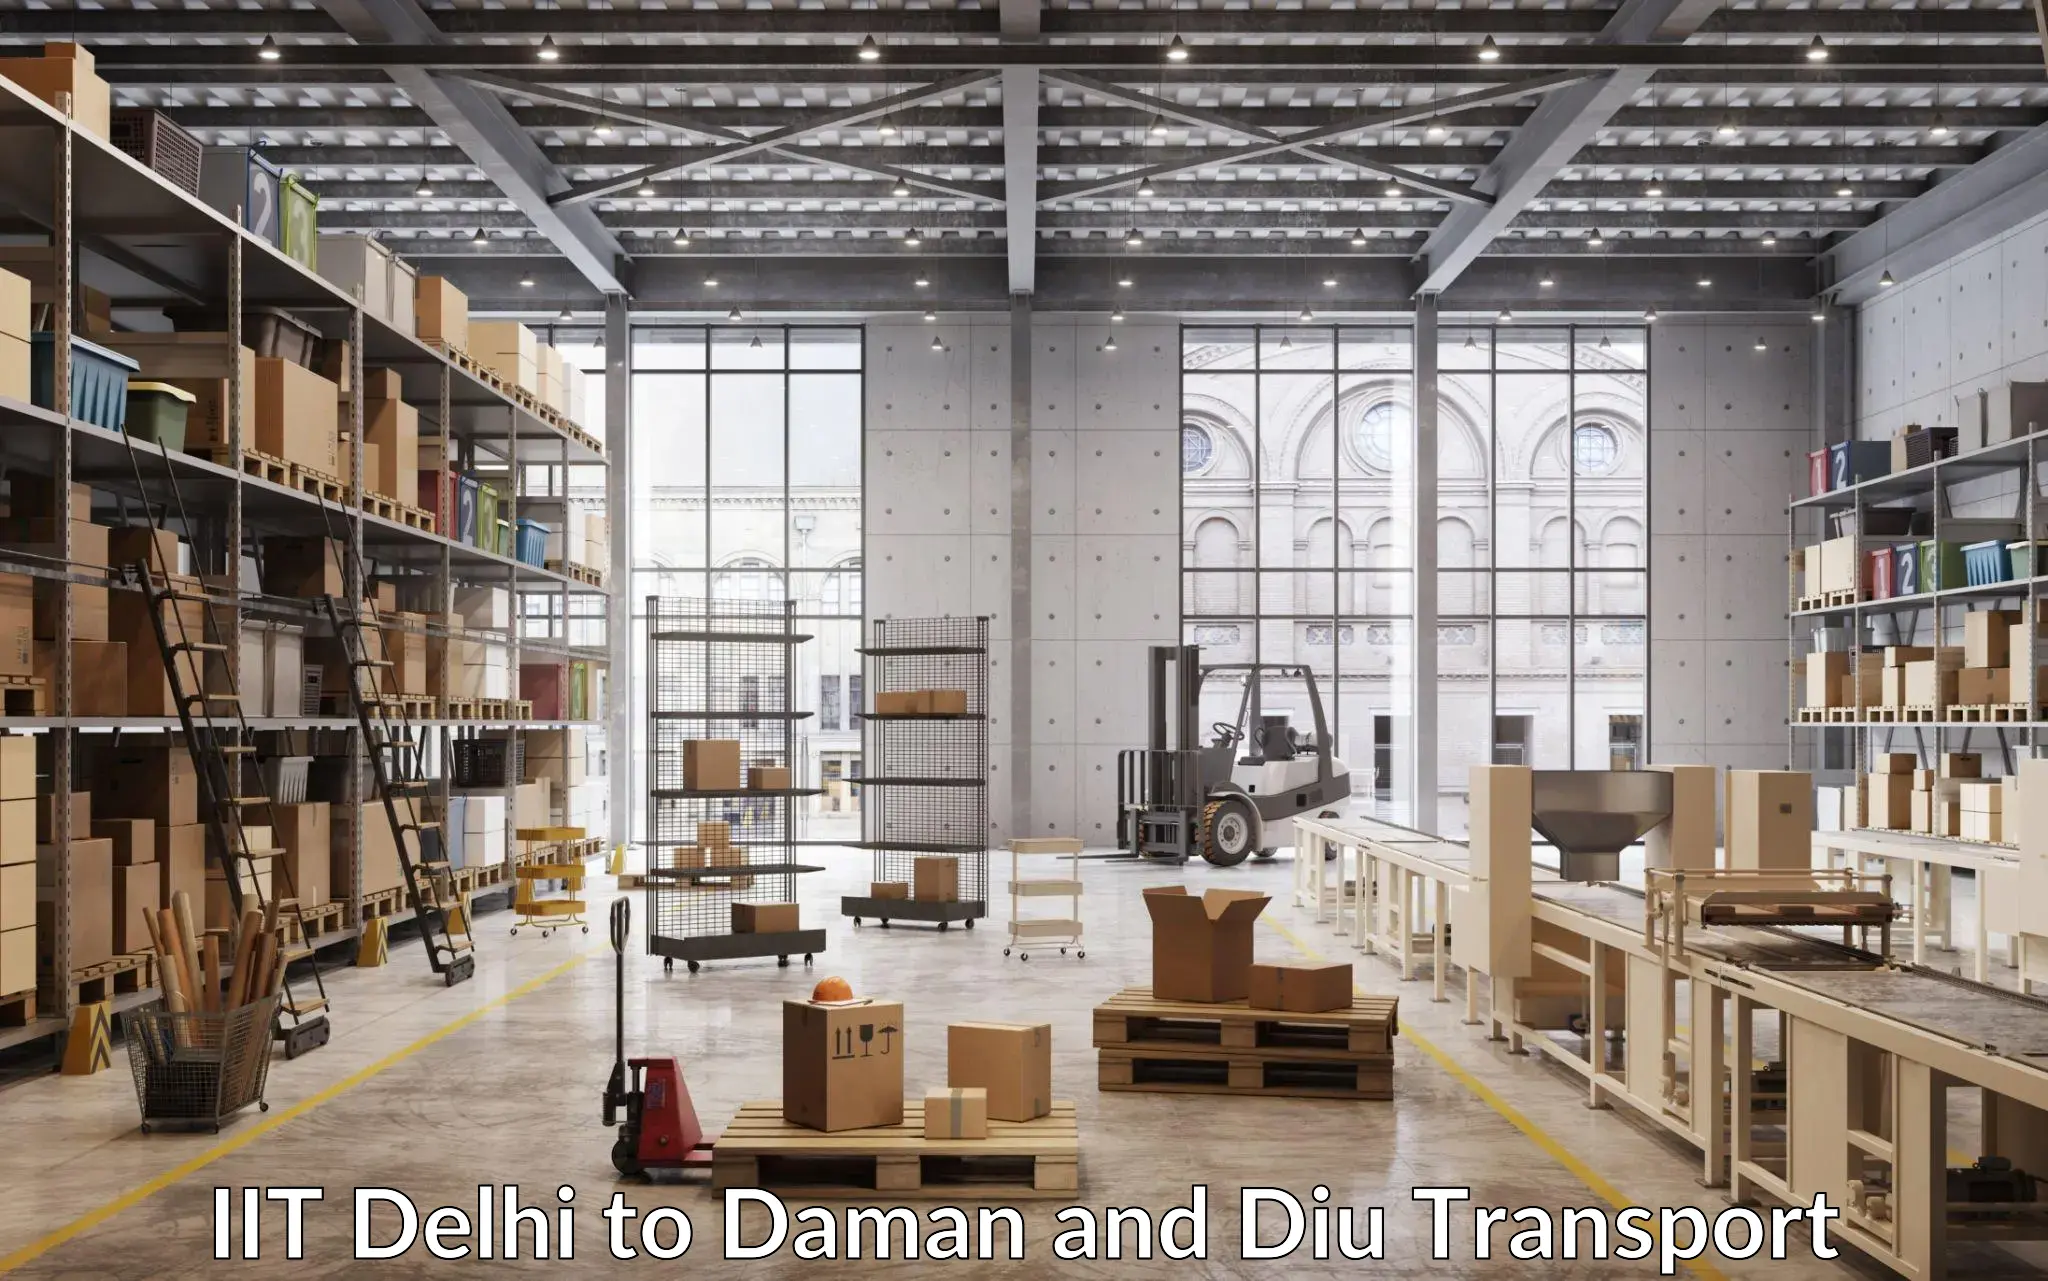 All India transport service IIT Delhi to Daman and Diu